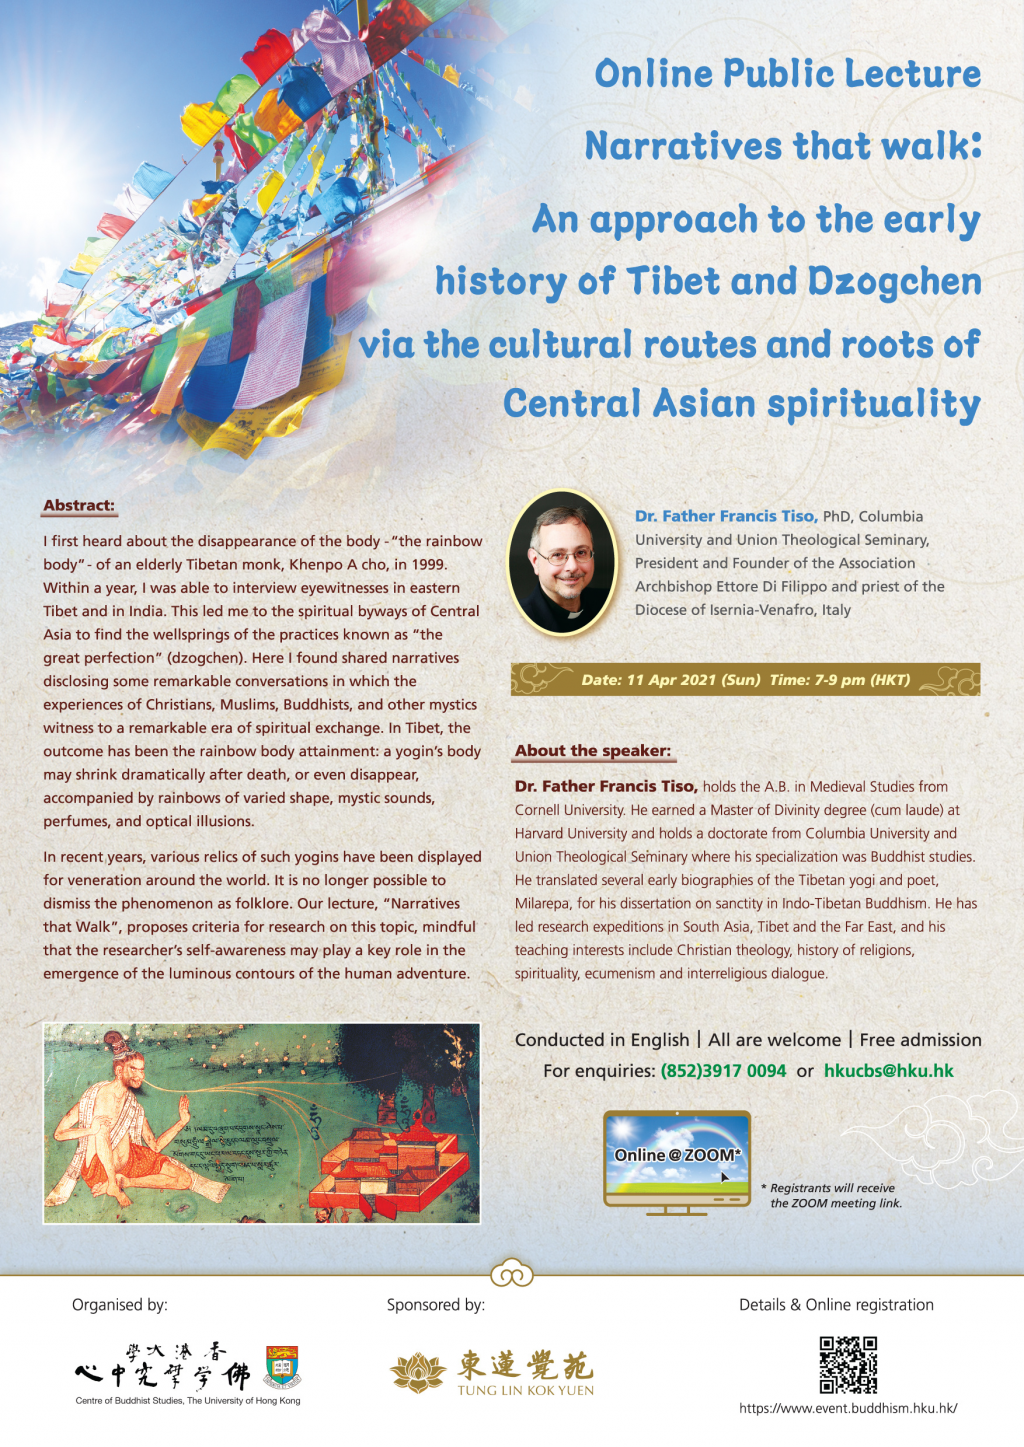 [Apr 11] Online Lecture by Dr Father Francis - An approach to the early history of Tibet and Dzogchen